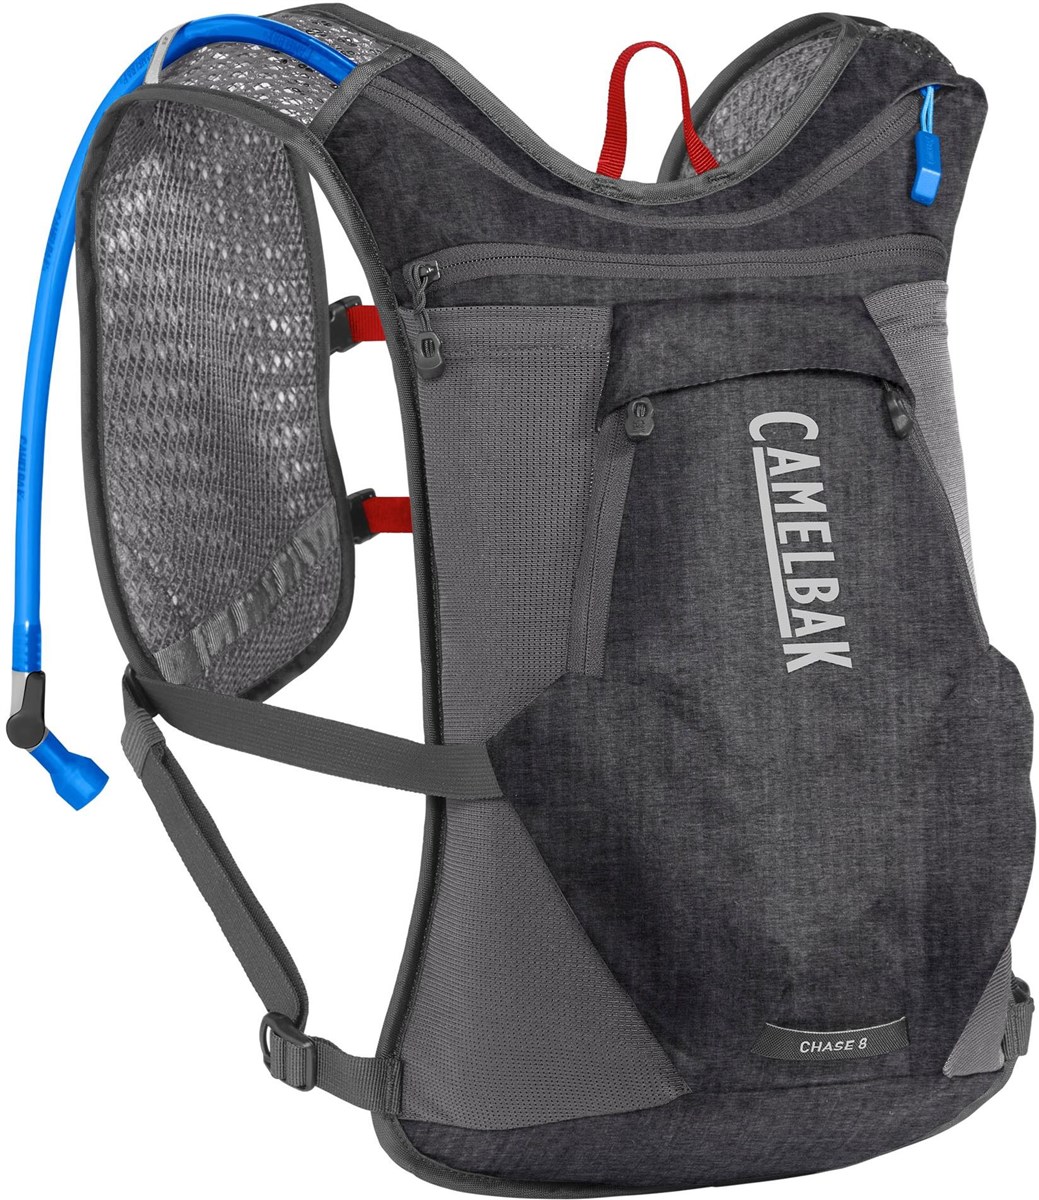 CamelBak Chase 8 Bike Vest Hydration Pack Bag with Fusion 2L Limited Edition product image